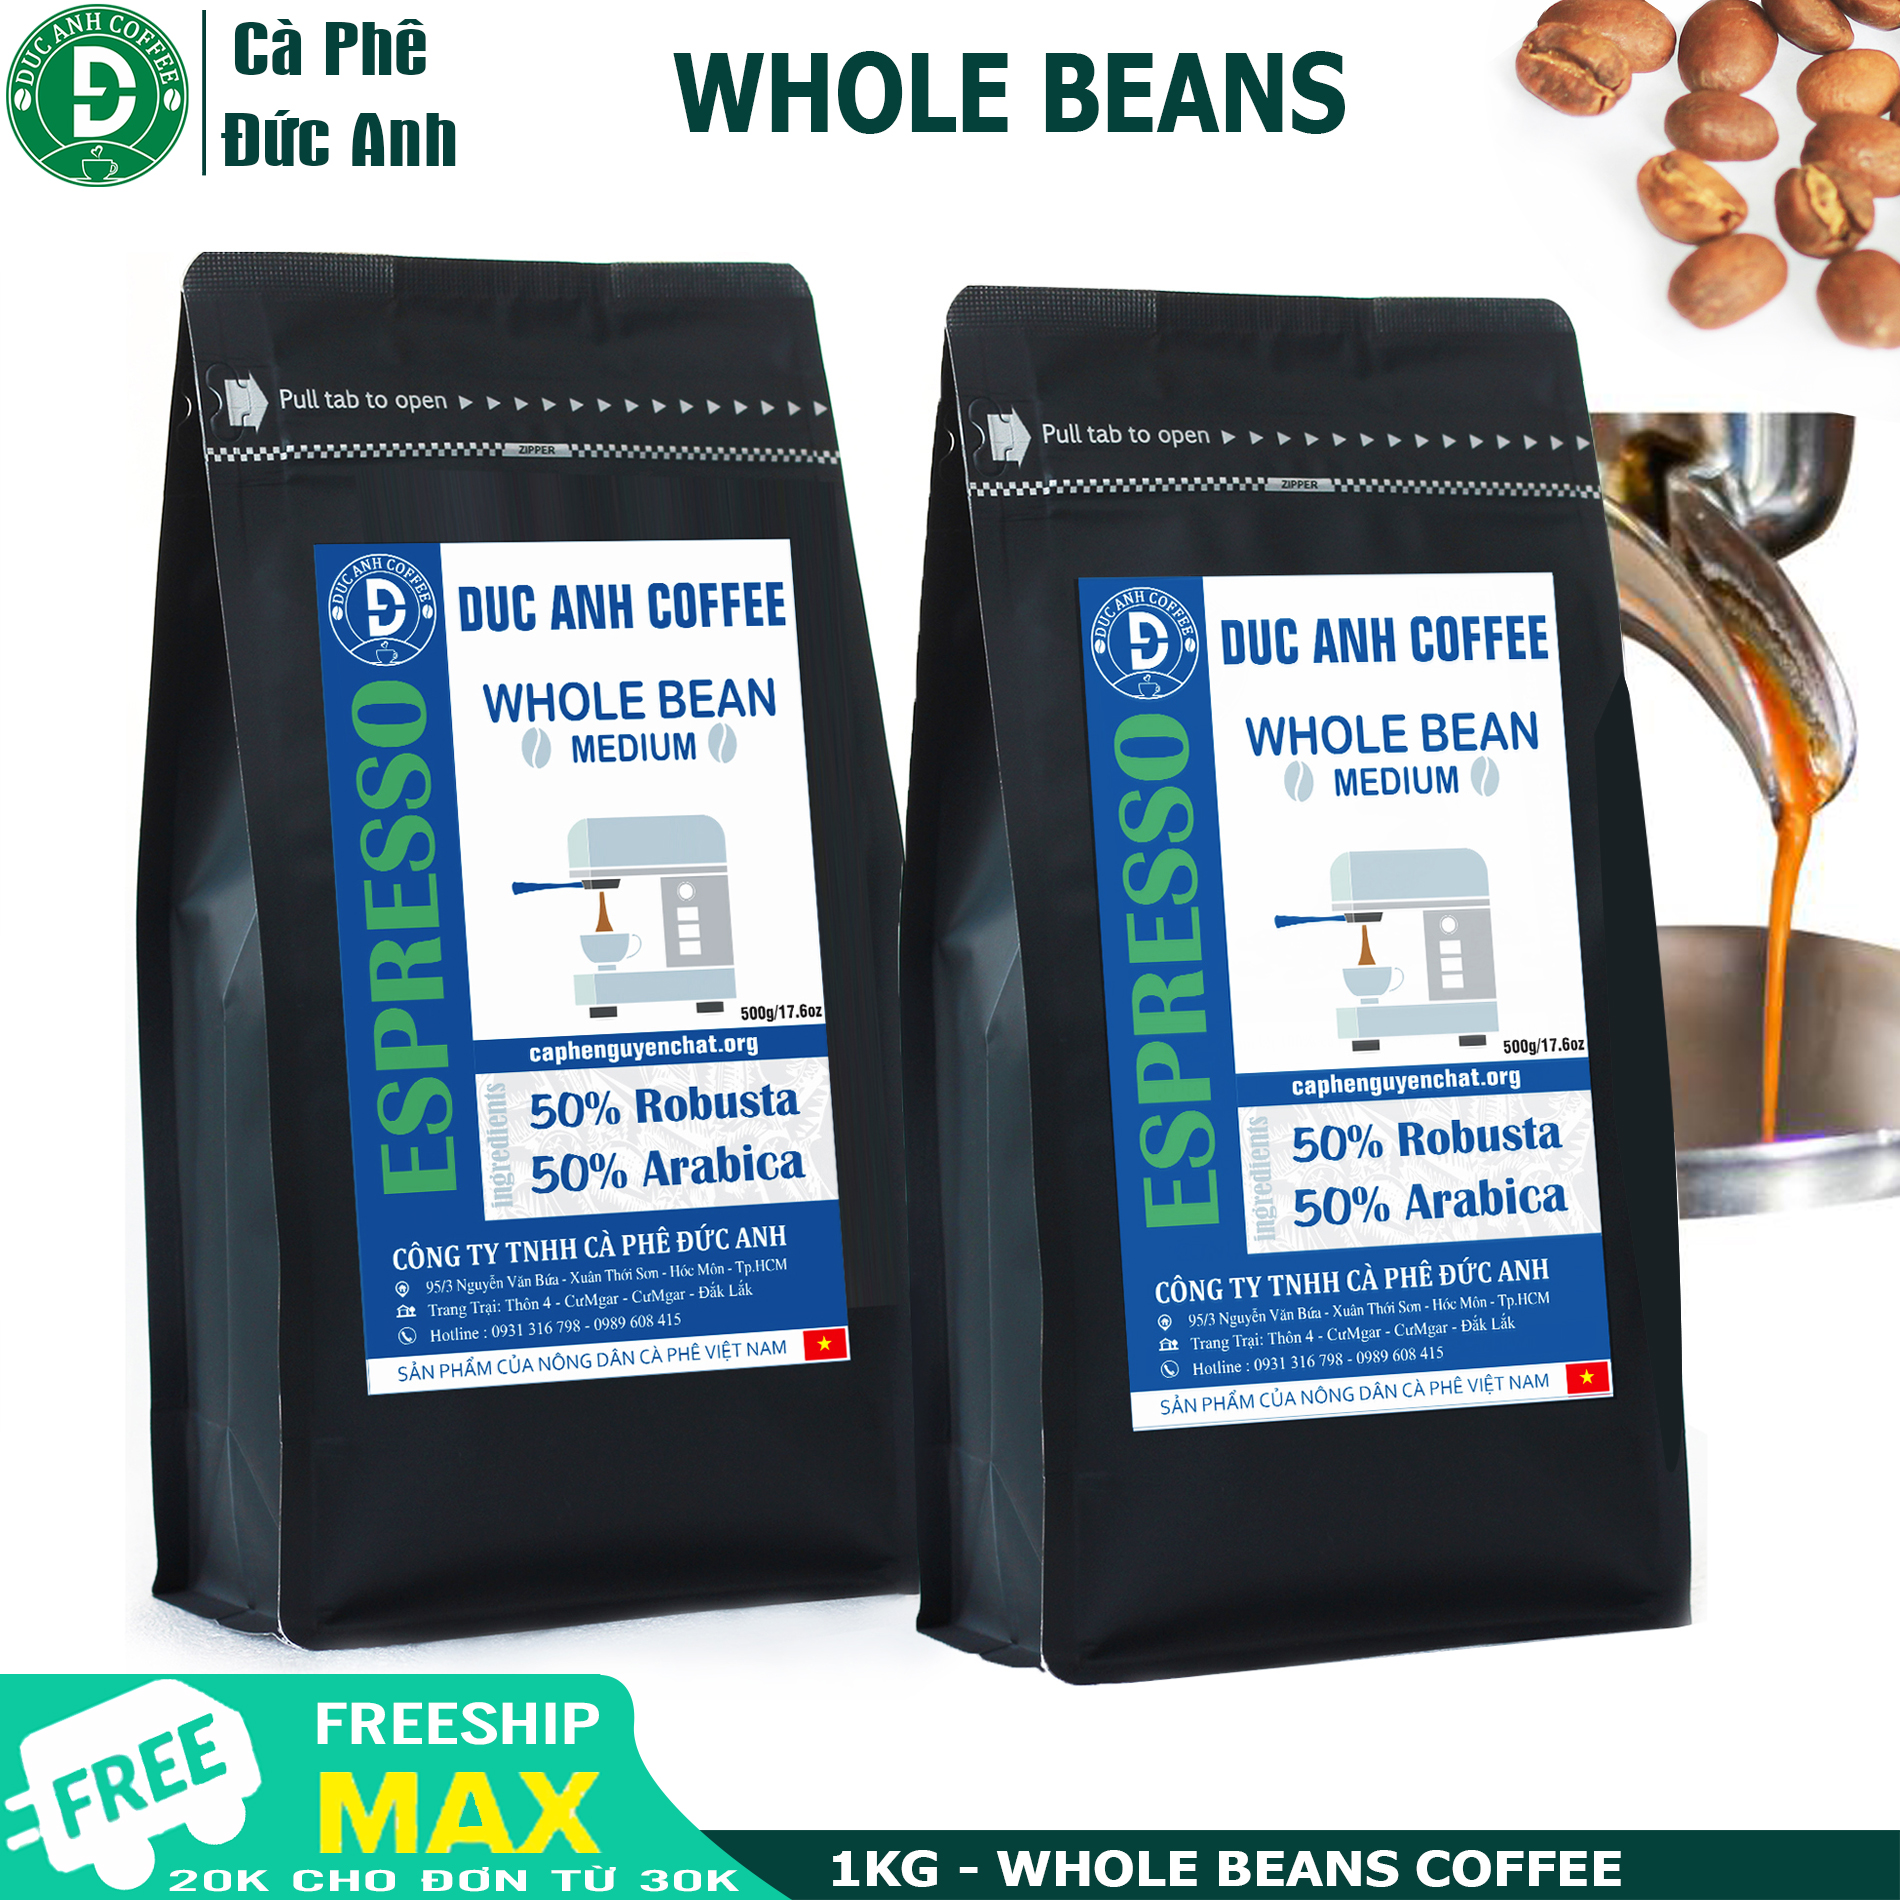 1kg special whole beans coffee with Espresso machine at the rate of 50%